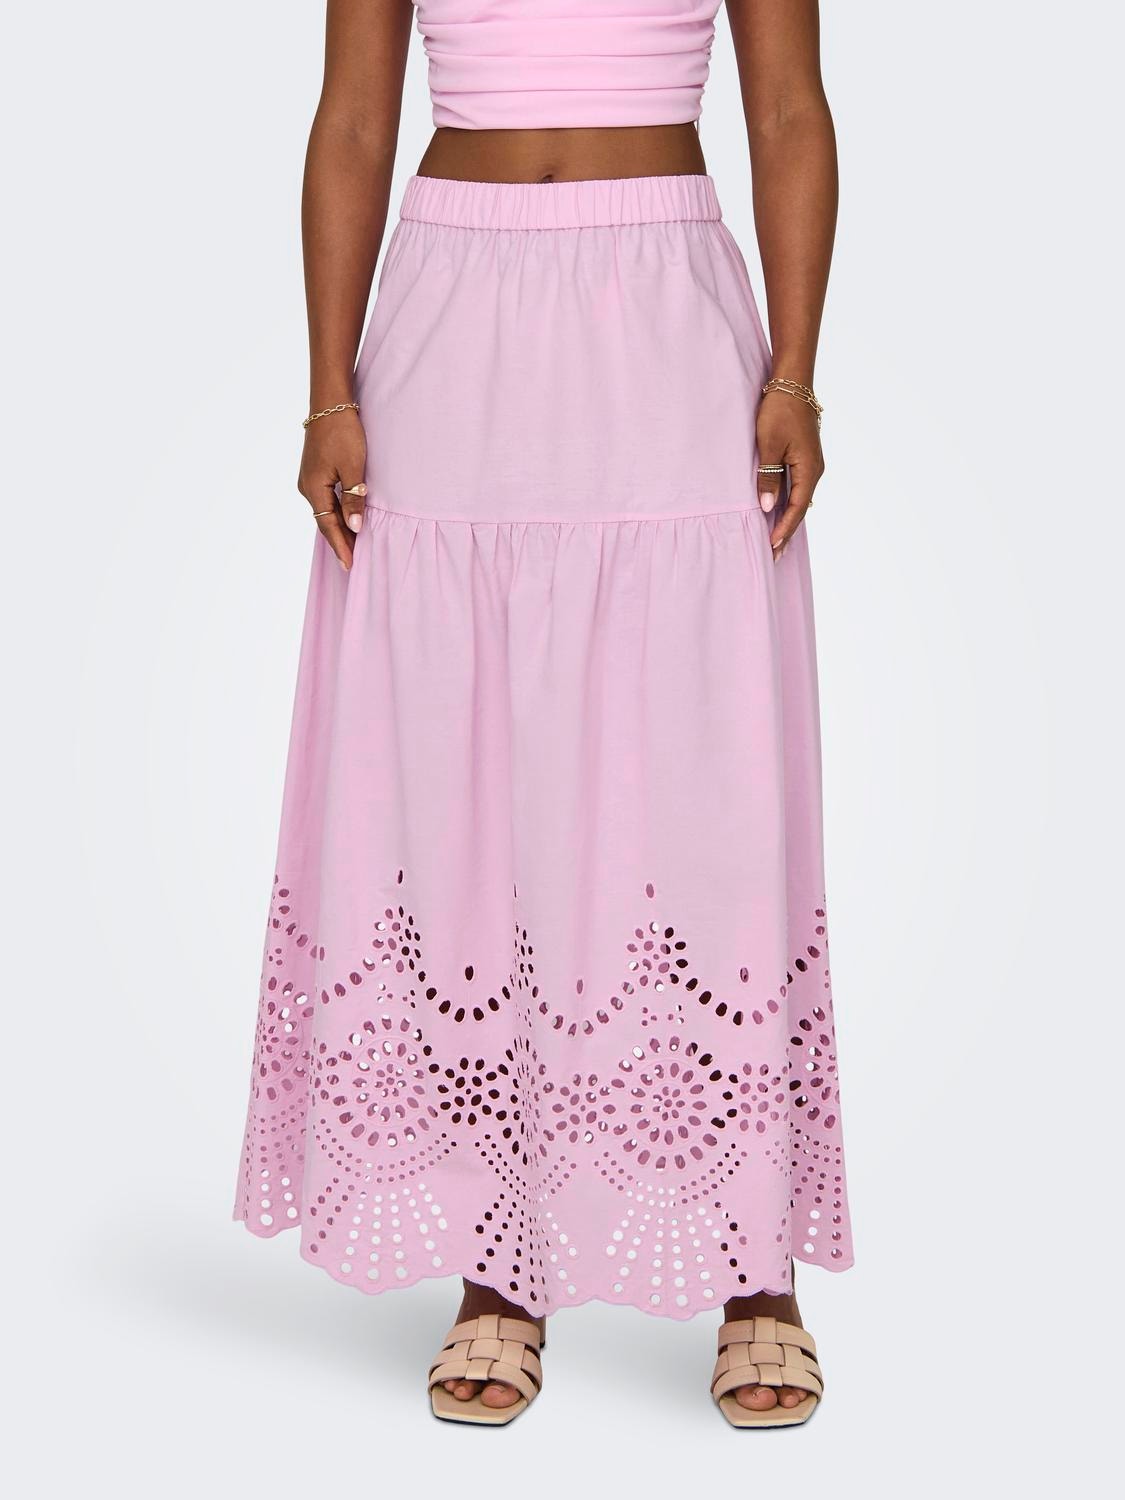 ONLY Maxi skirt with embrodery anglaise -Pirouette - 15319141